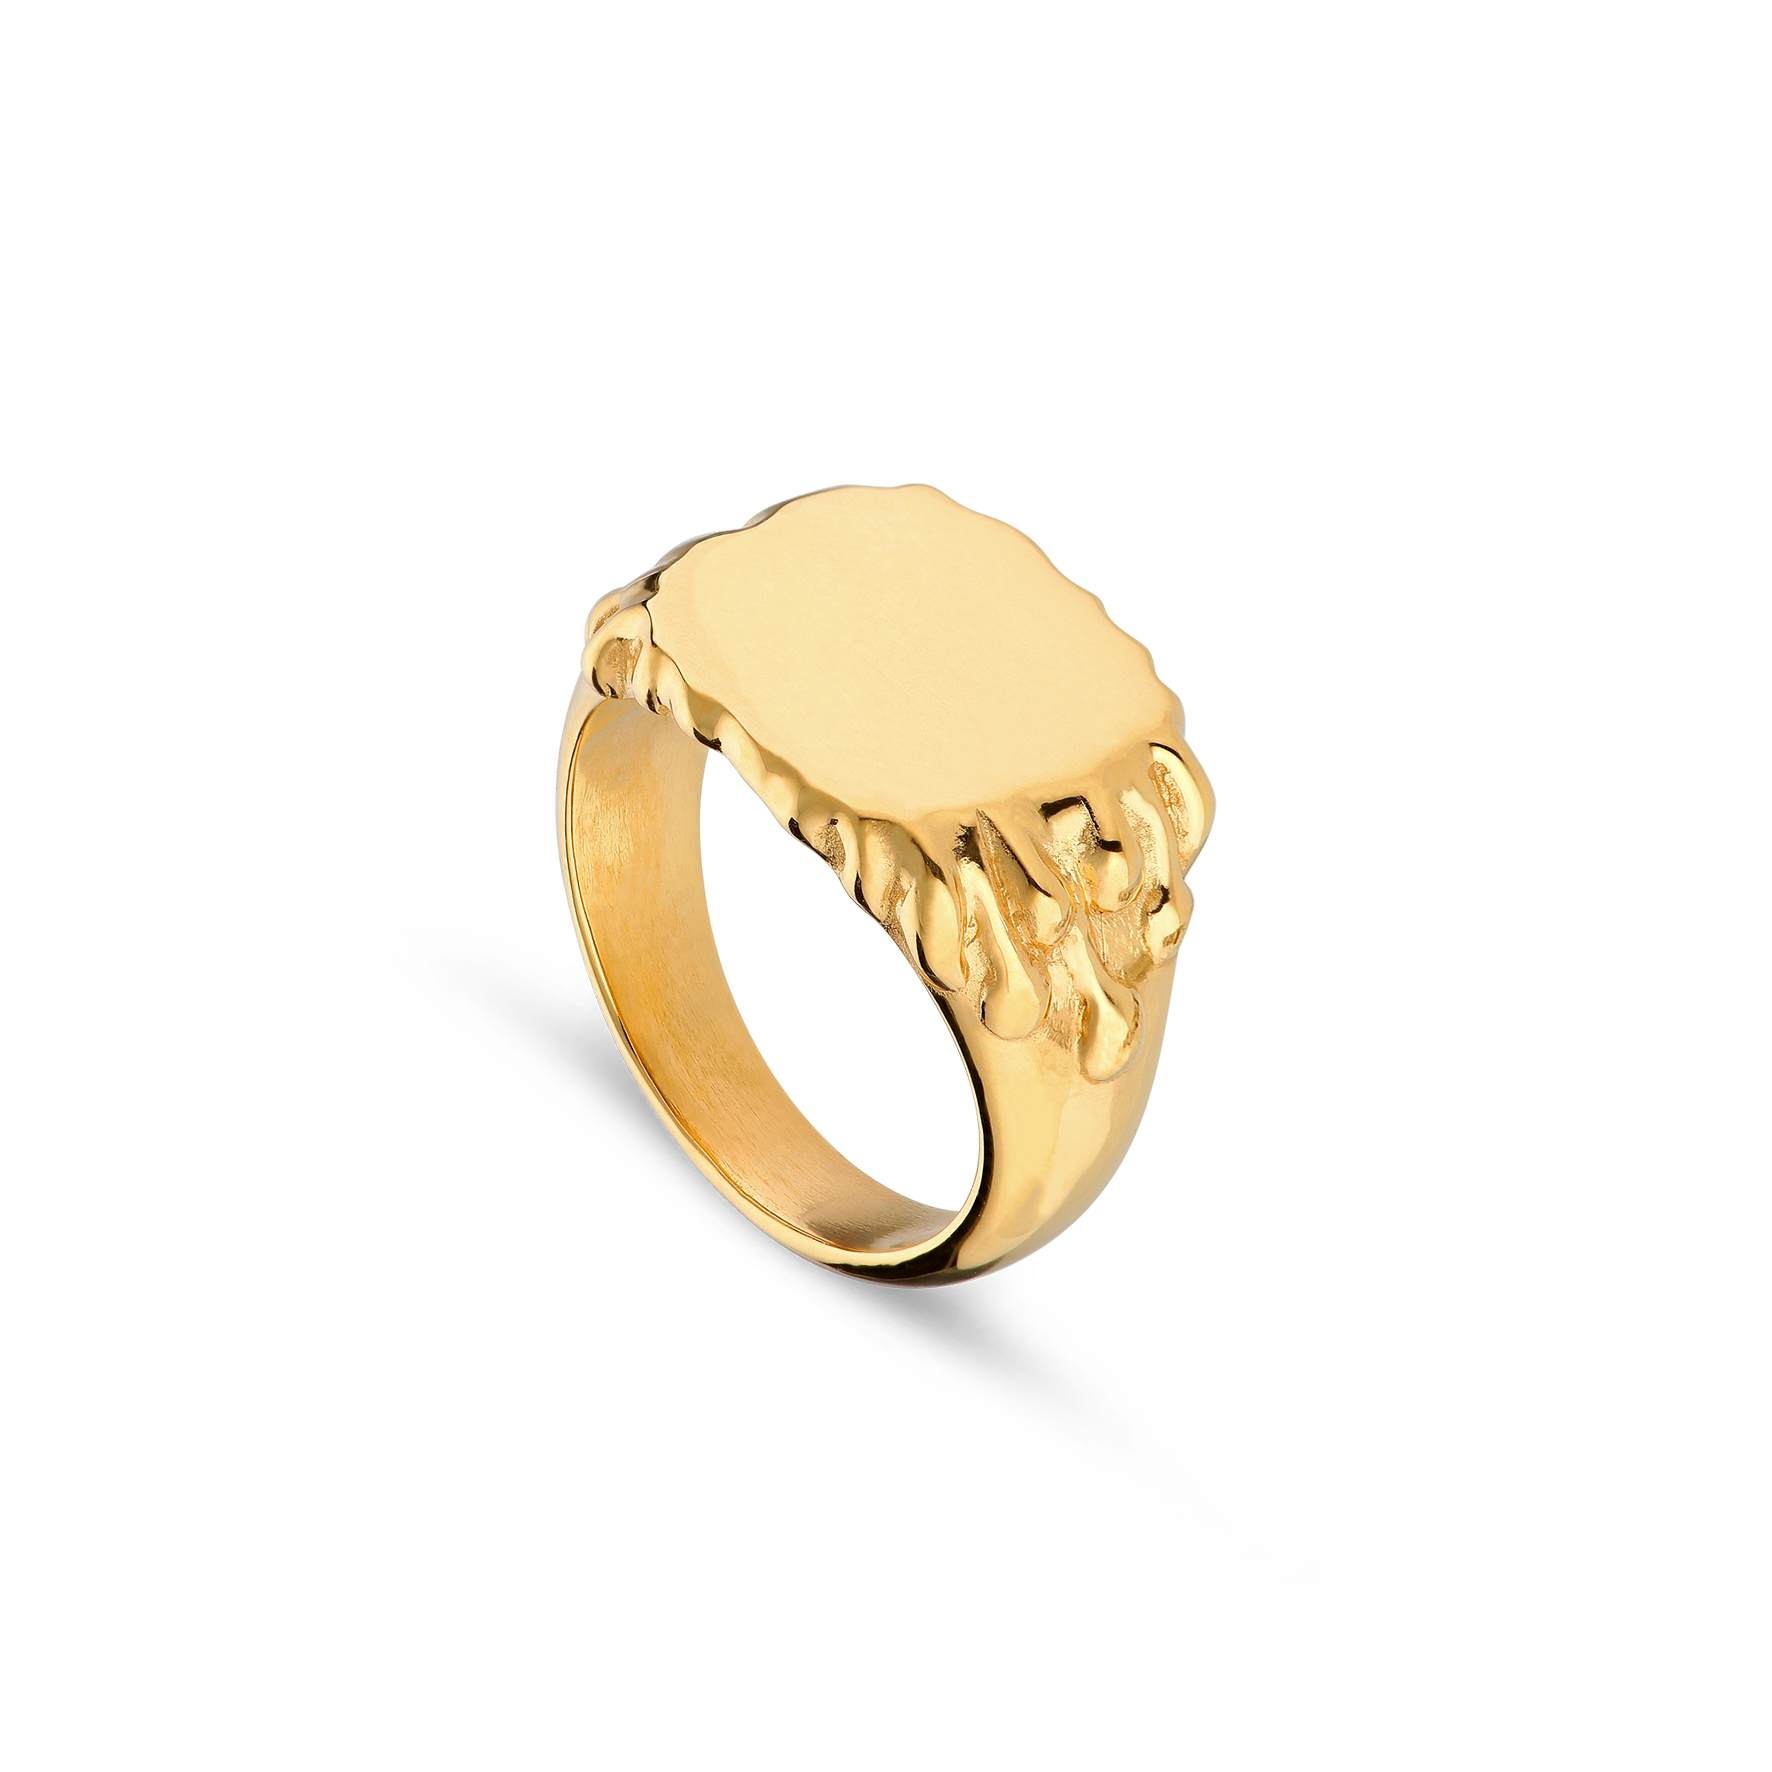 Drippy Signet Ring from Jane Kønig in Goldplated-Silver Sterling 925